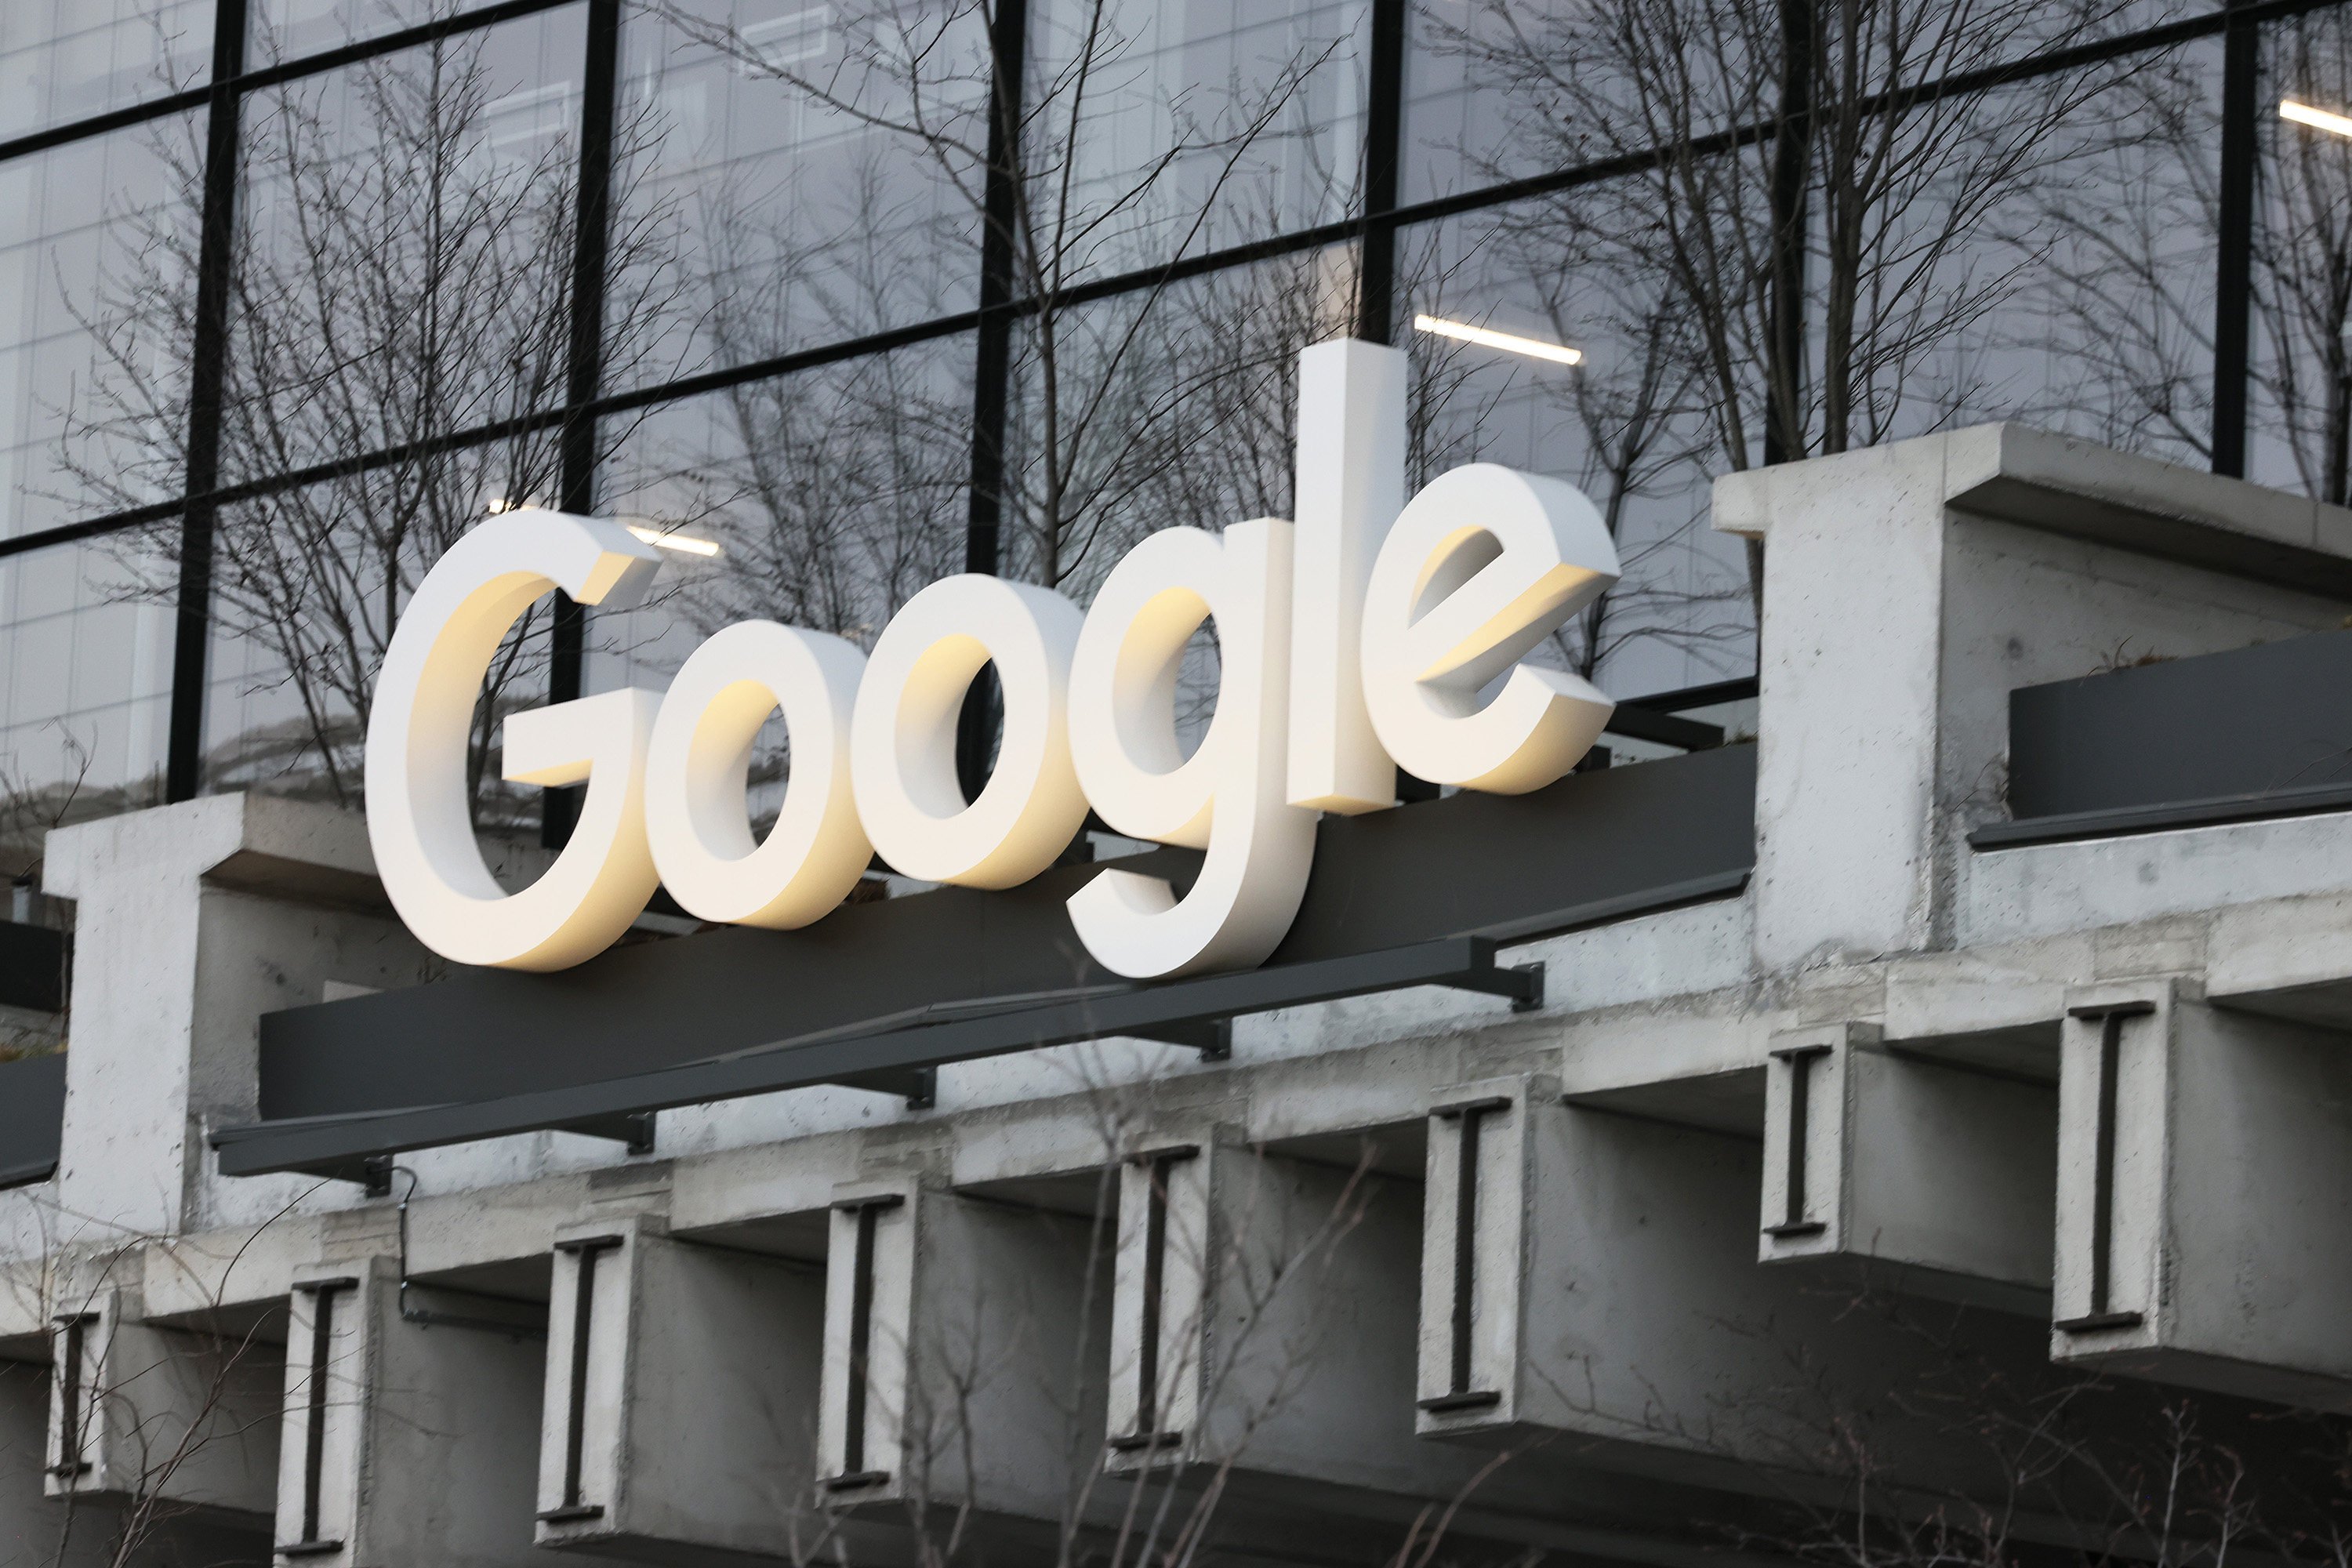 Ronny Tong has said Google’s compliance with the court order reflected that the Hong Kong government’s injunction served a “basic purpose” that was to “let all service providers know the law is not on their side”. Photo: Getty Images via TNS